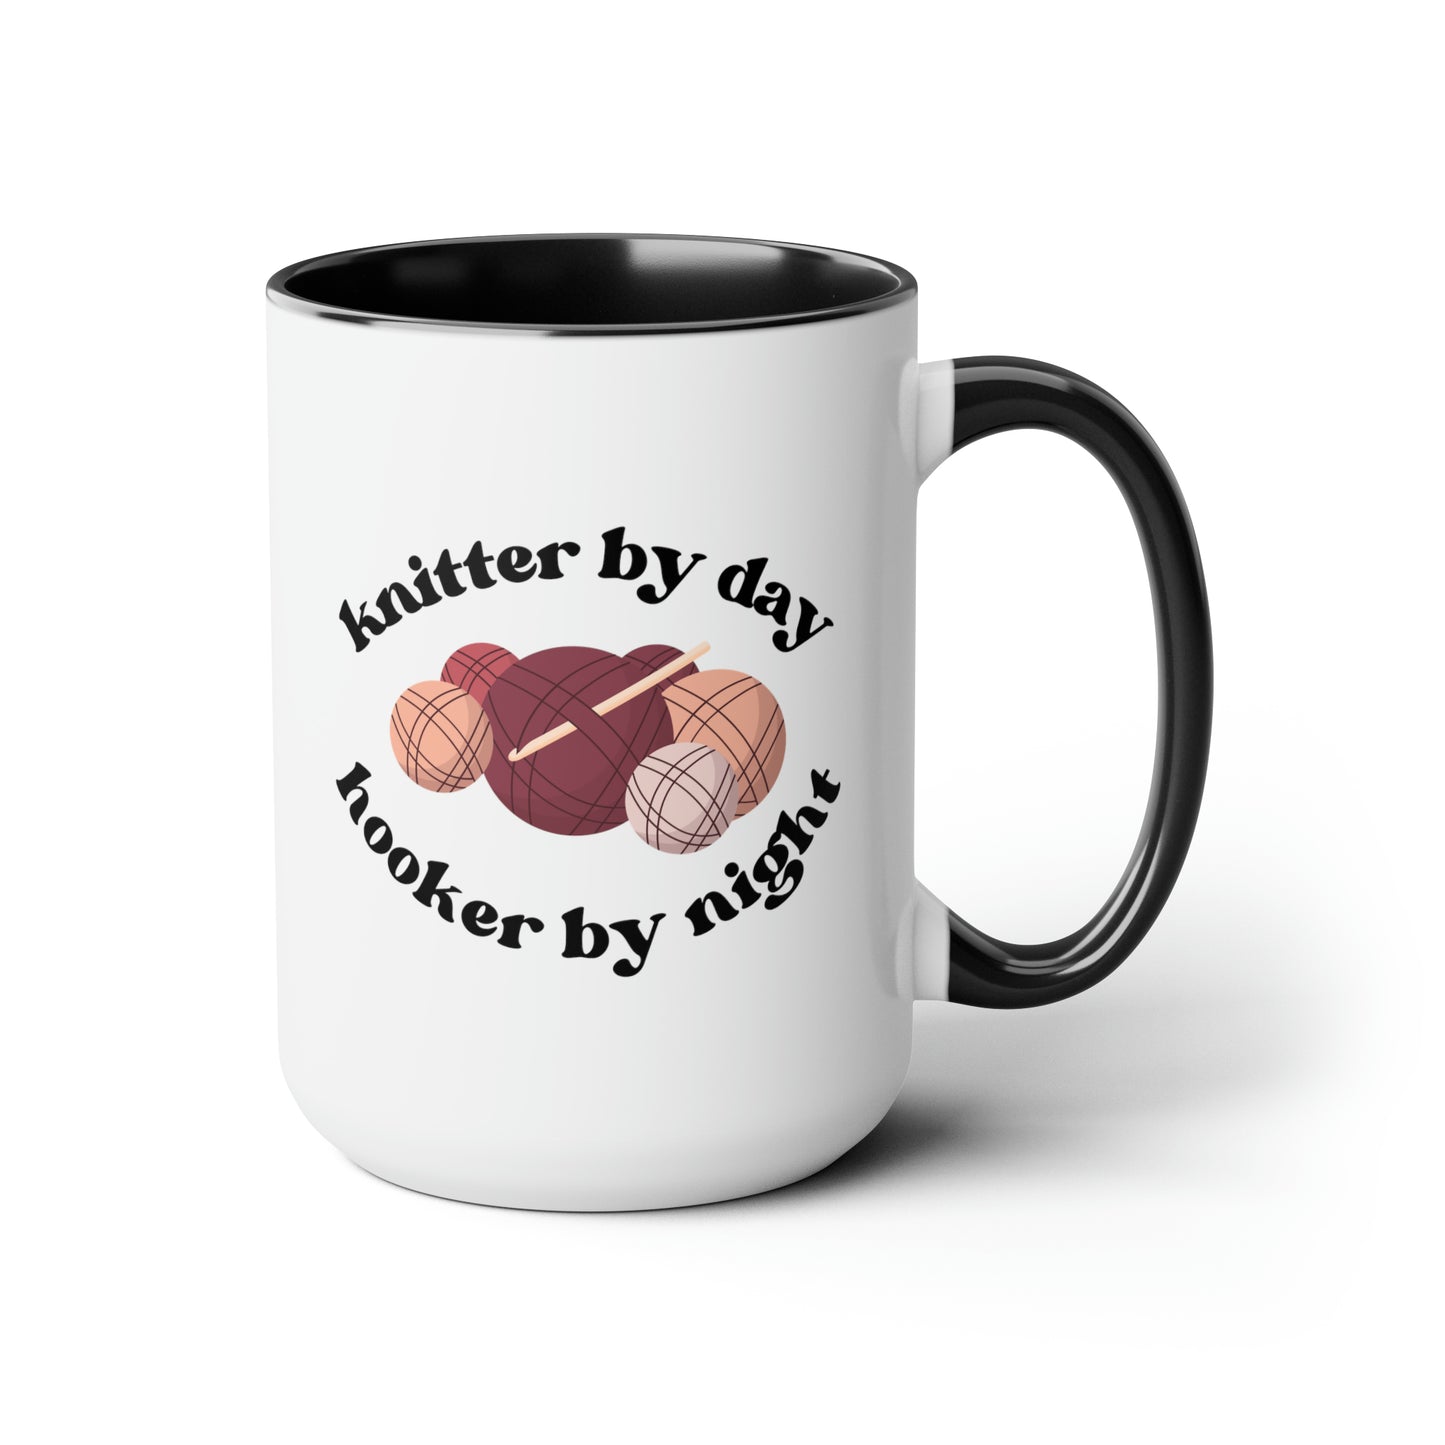 Knitter By Day Hooker By Night 15oz white with black accent funny large coffee mug gift for mom mother's day wool knitting novelty rude joke waveywares wavey wares wavywares wavy wares